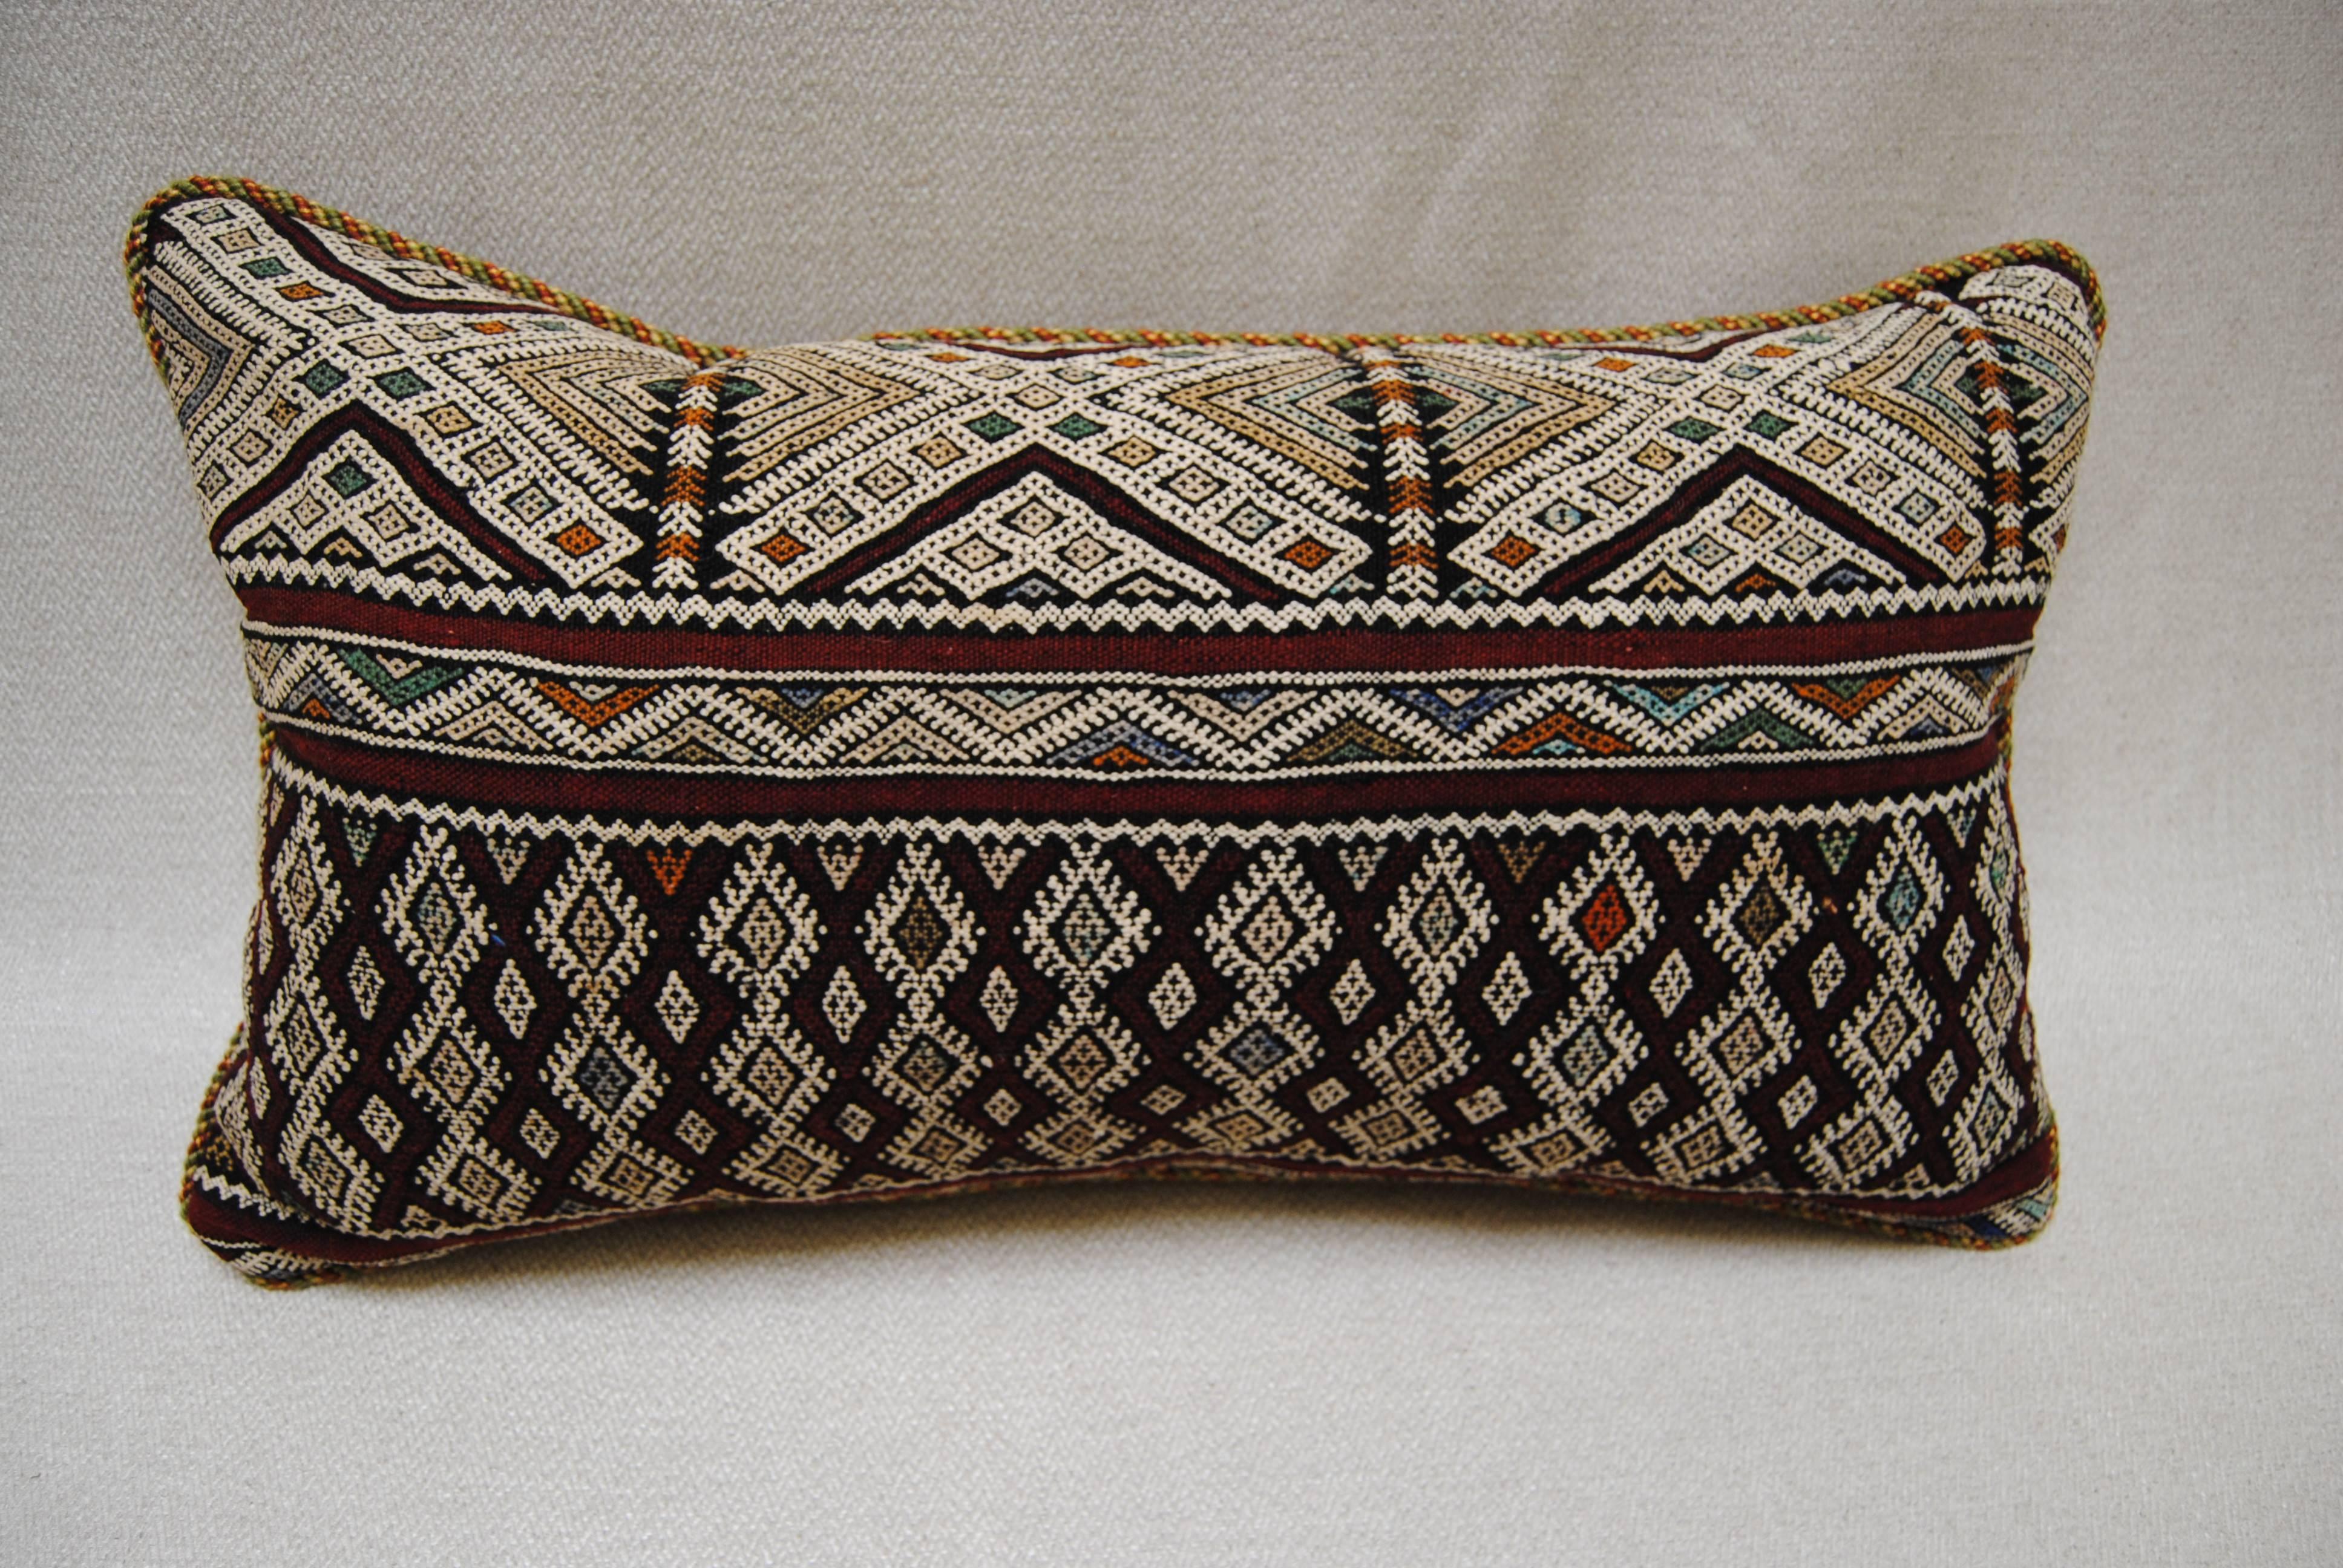 Custom pillow cut from a vintage hand-loomed wool Moroccan Berber rug from the Atlas Mountains. Soft, lustrous wool with all natural dyes, amazing colors. Very intricate weaving on this older piece. Pillow is corded with a Brunschwig trim and backed